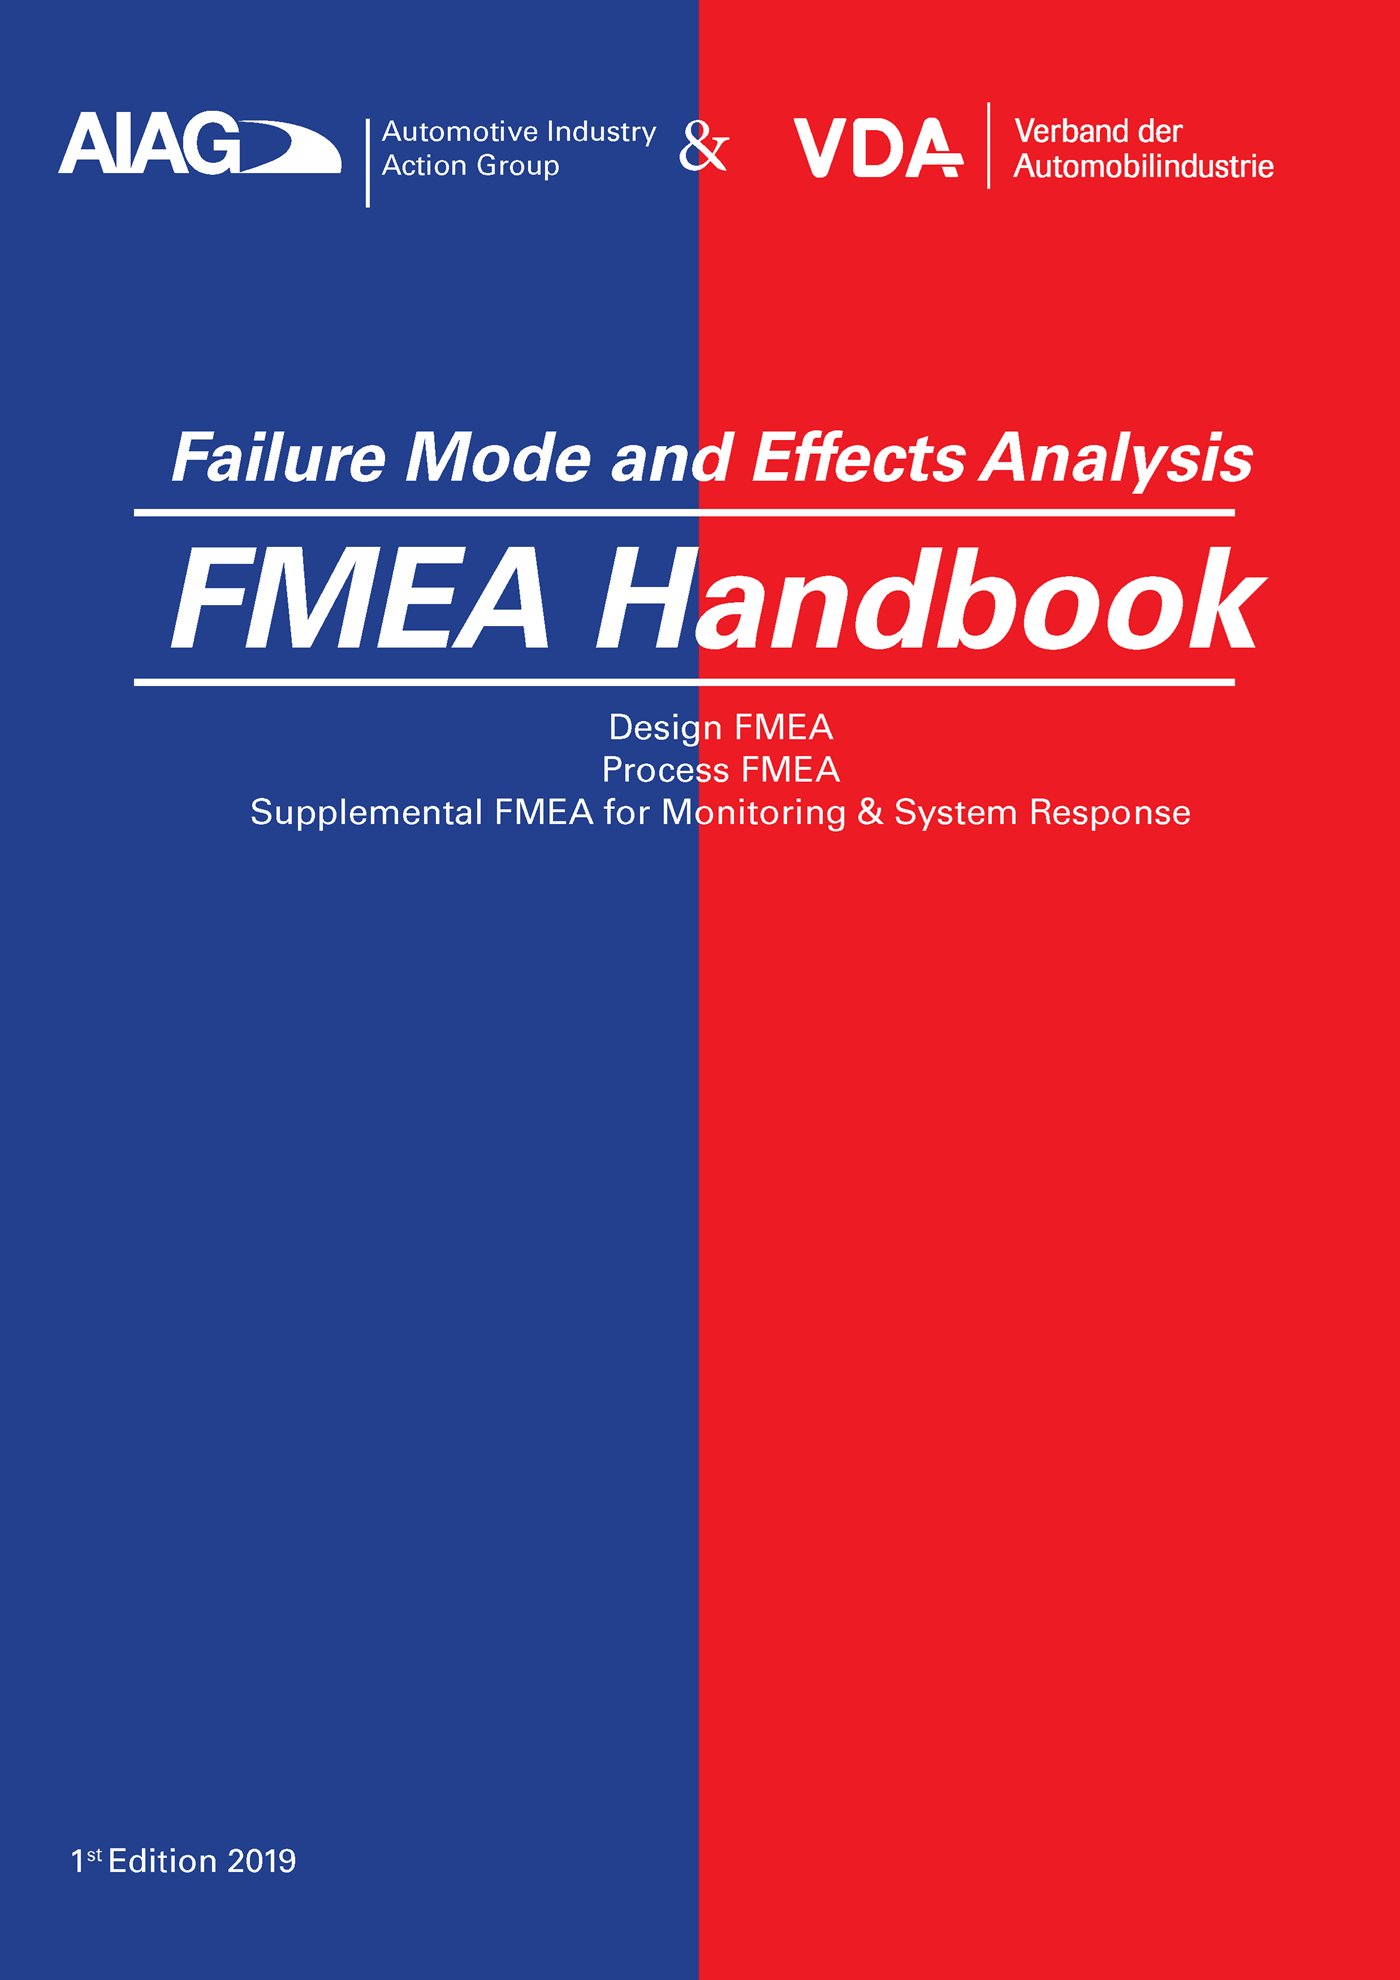 Publikation  VDA AIAG & VDA FMEA-Handbook
 Design FMEA, Process FMEA, 
 Supplemental FMEA for Monitoring & System Response
 First Edition Issued June 2019 1.1.2019 Ansicht